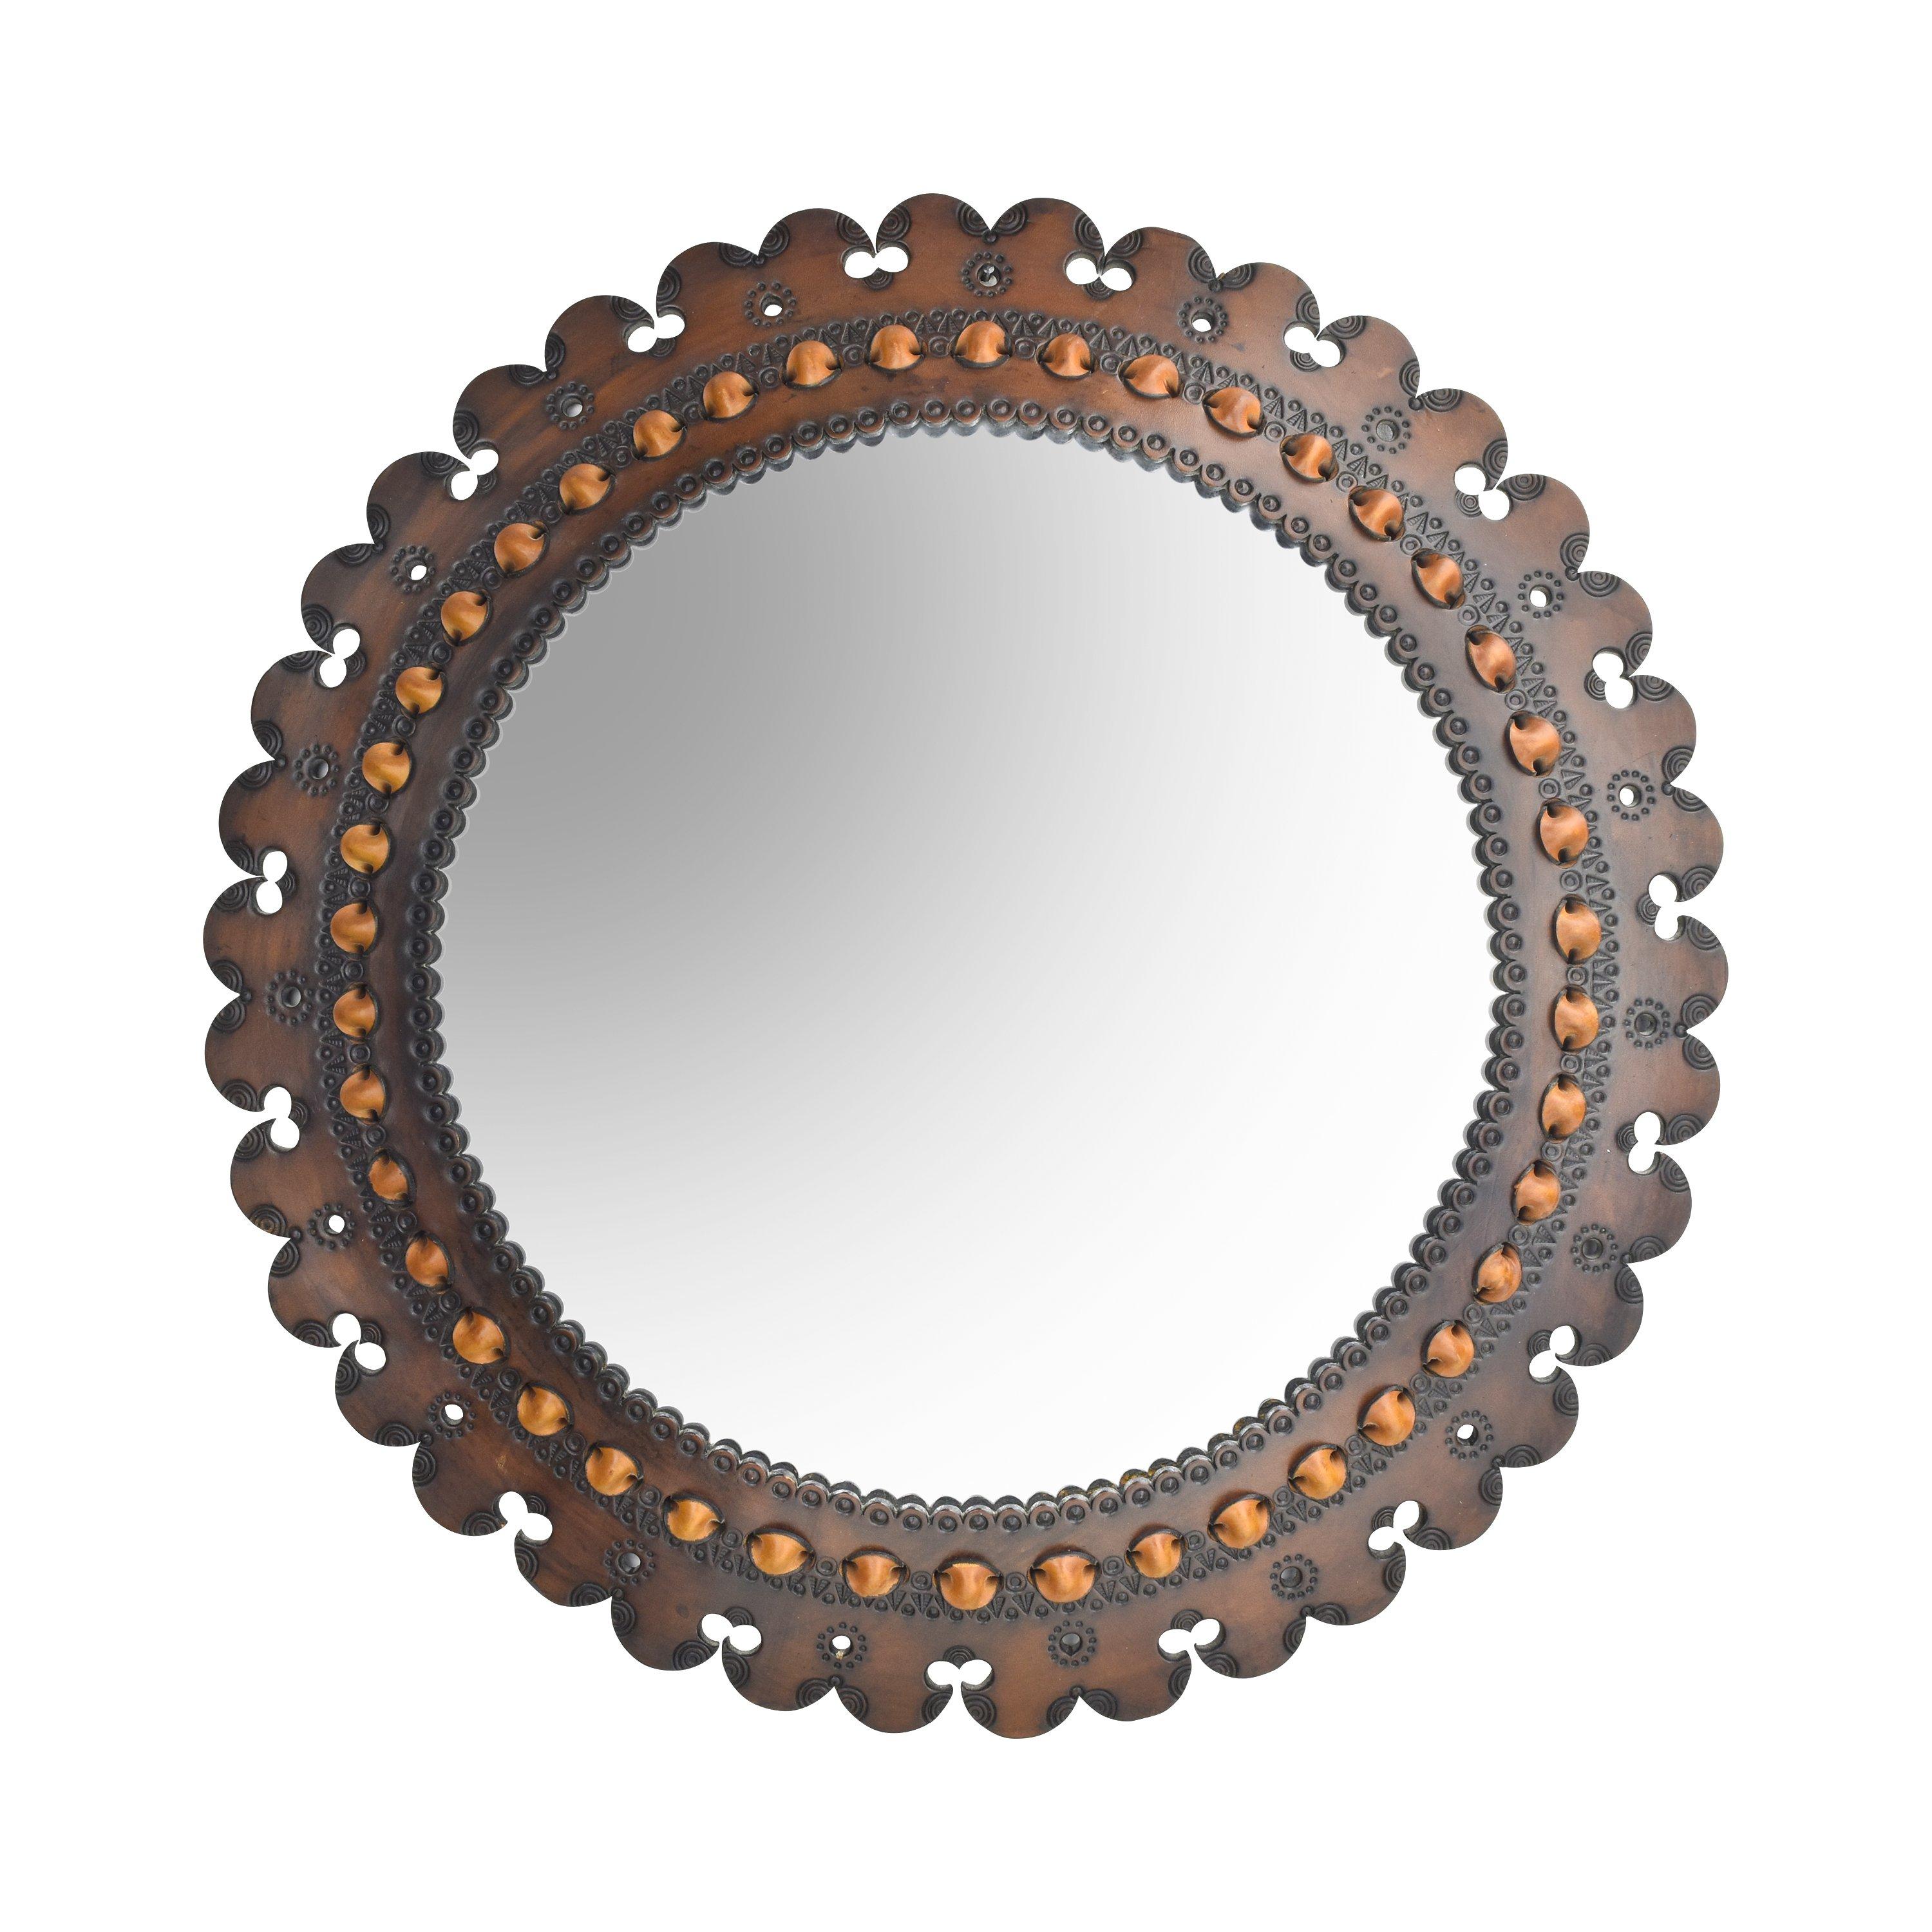 A large round handmade saddle leather wall mirror with embossed decorations and leather stitching dating to the 1960s probably made in France.